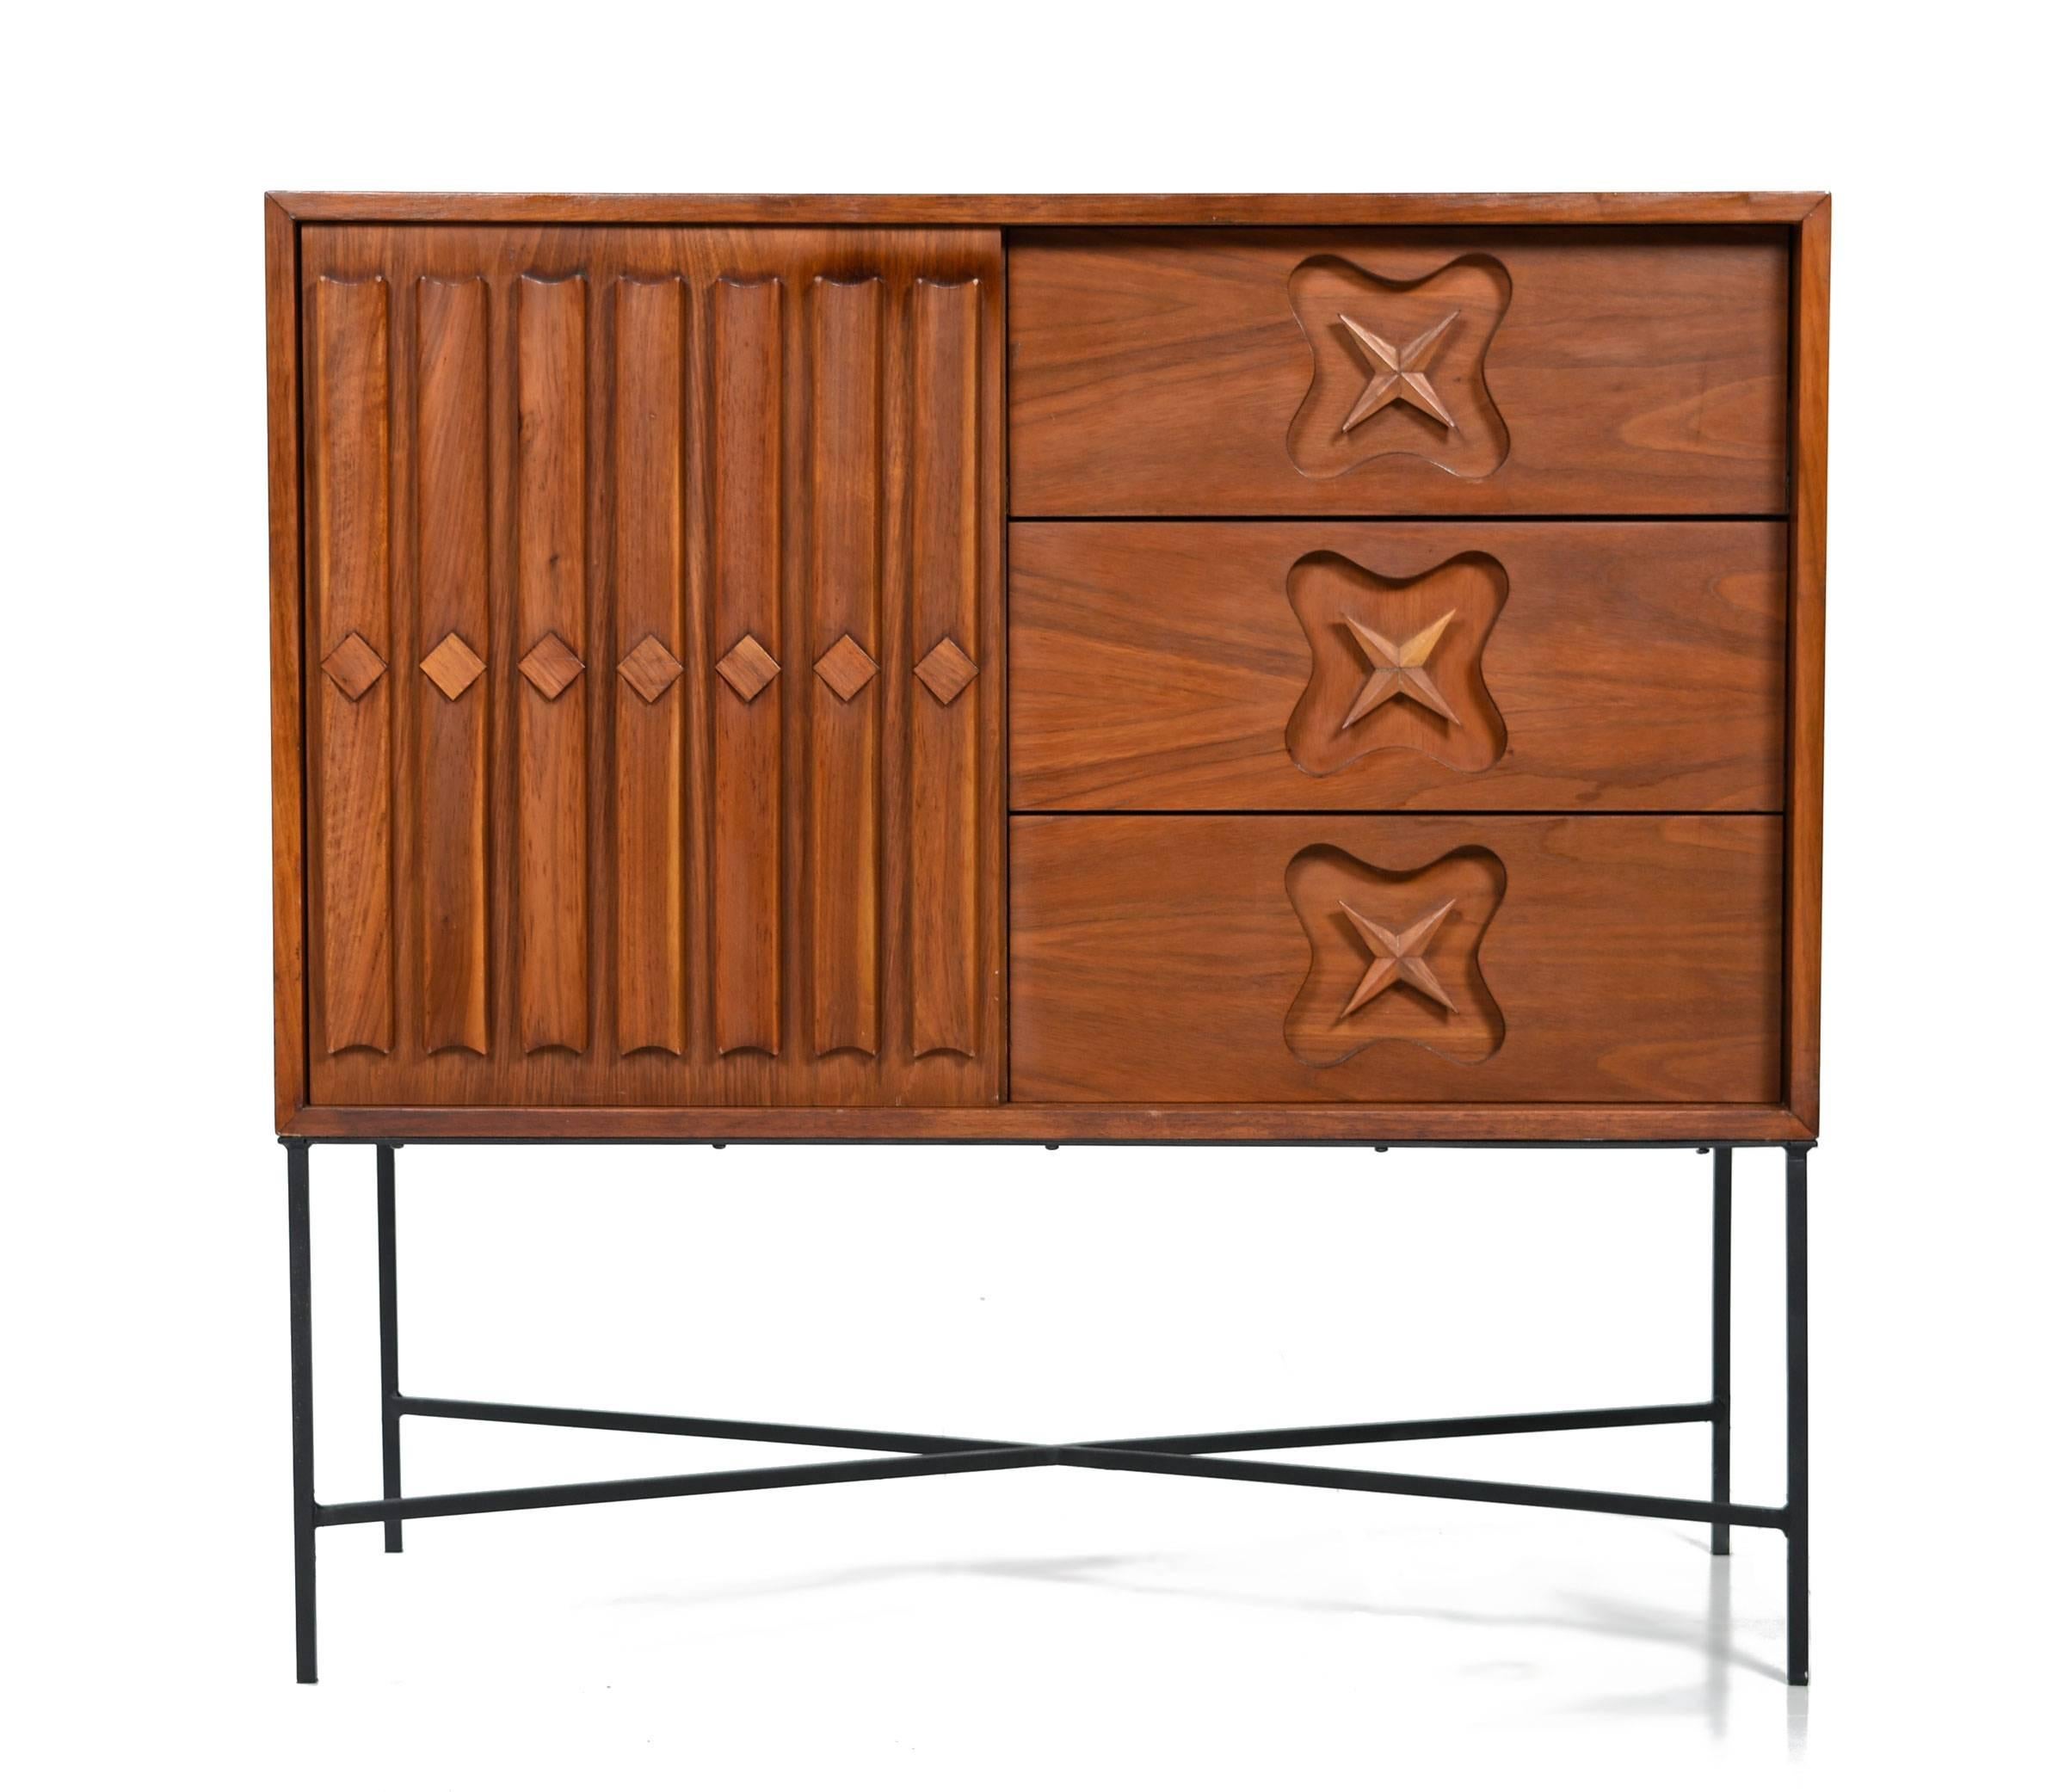 This one-of-a-kind chest of drawers is a stunner! The original Mid-Century Modern walnut cabinet has been professionally refinished and mounted to a custom-made, hand welded, wrought iron base. There isn't another like it anywhere! Use this piece as